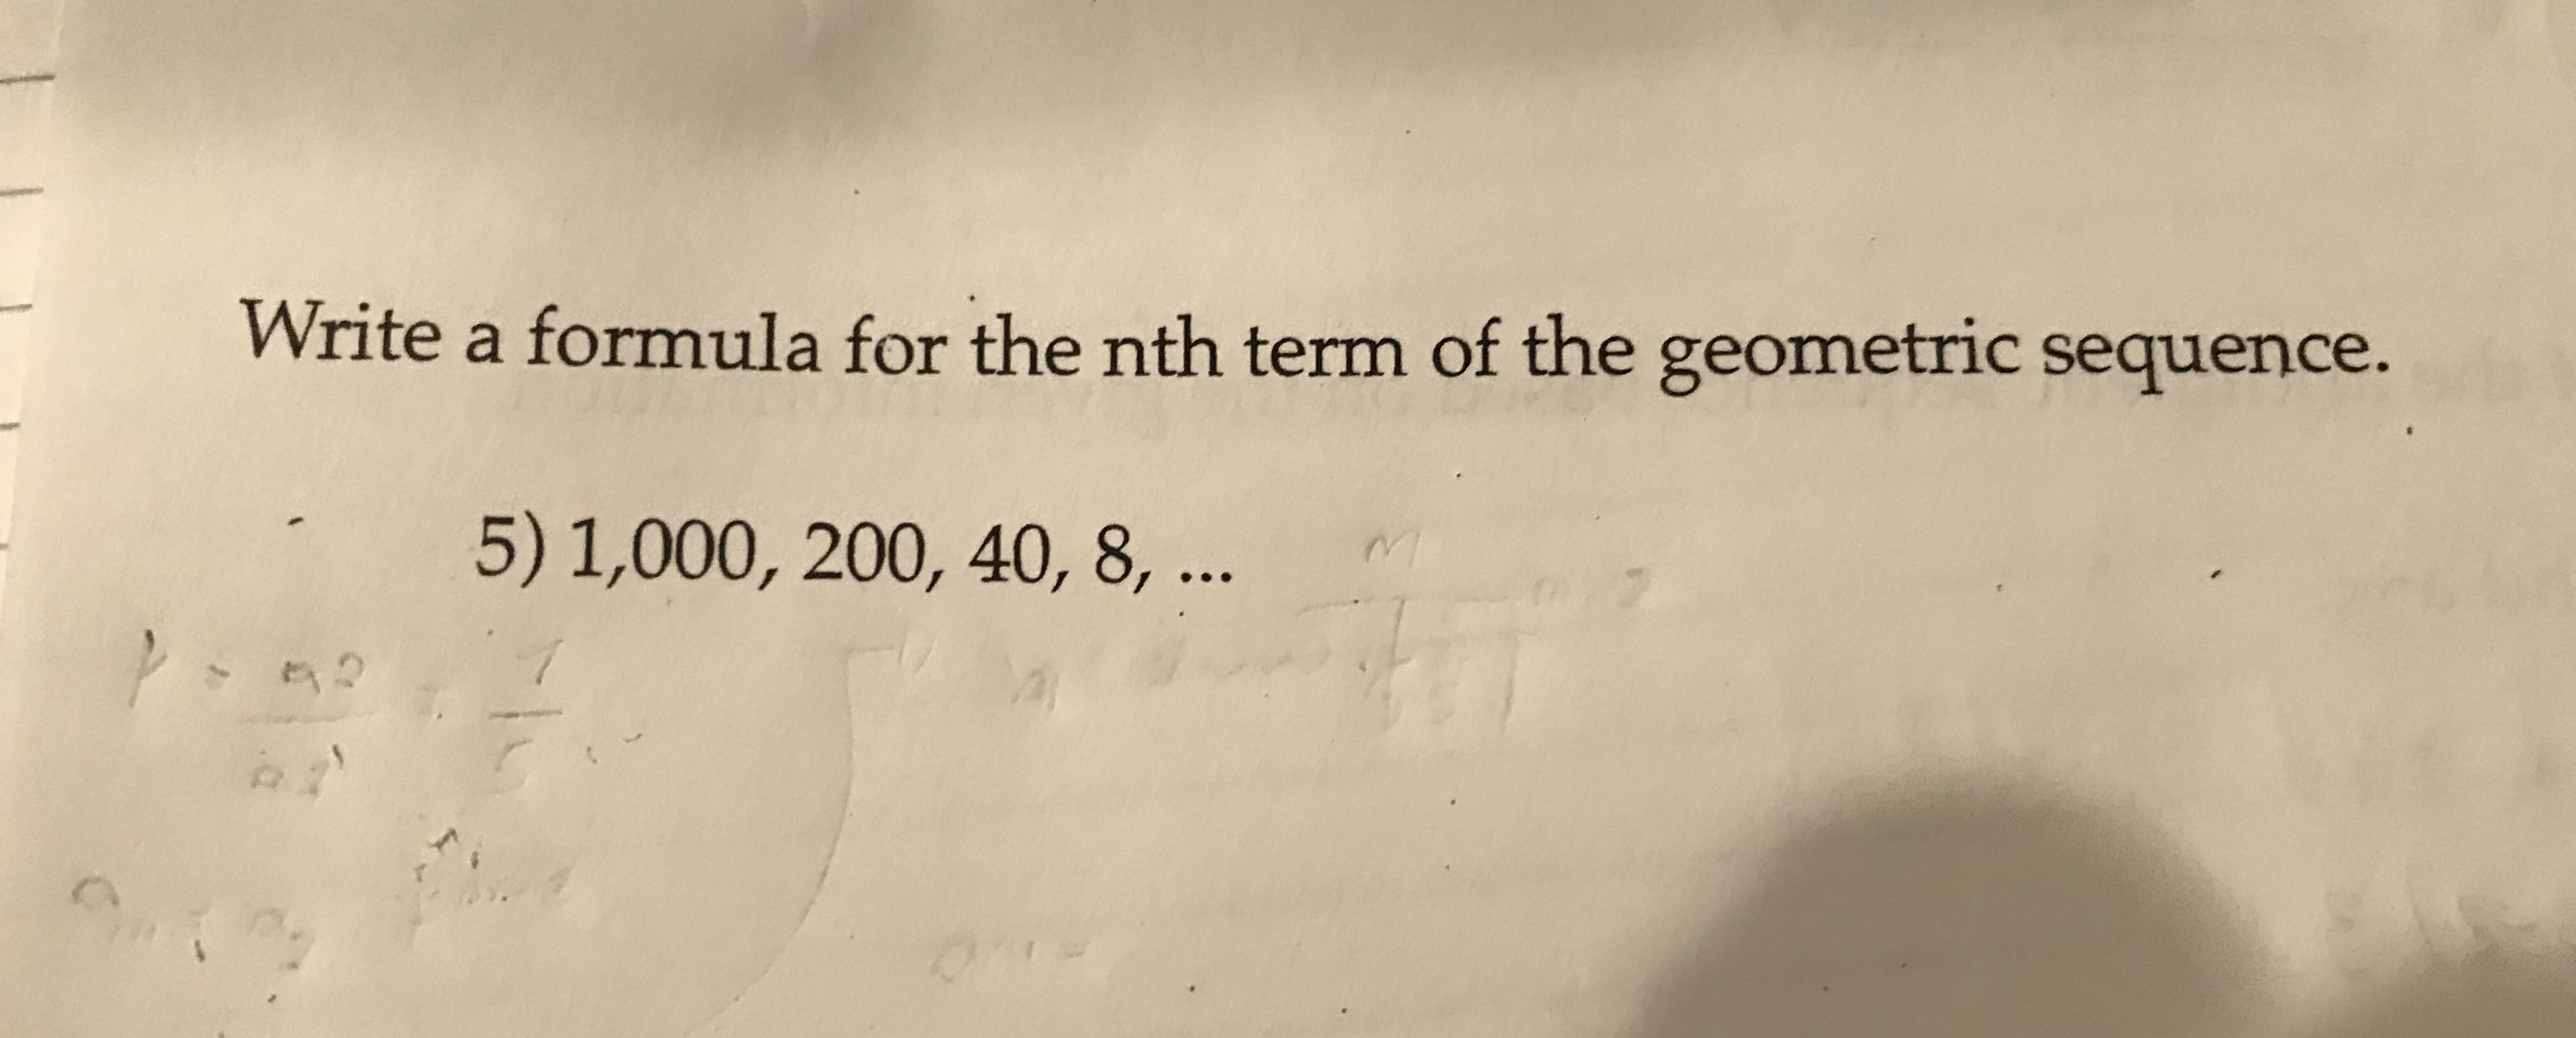 Write a formula for the nth term of the geometric sequence.
5)1,000, 200, 40, 8, ...
